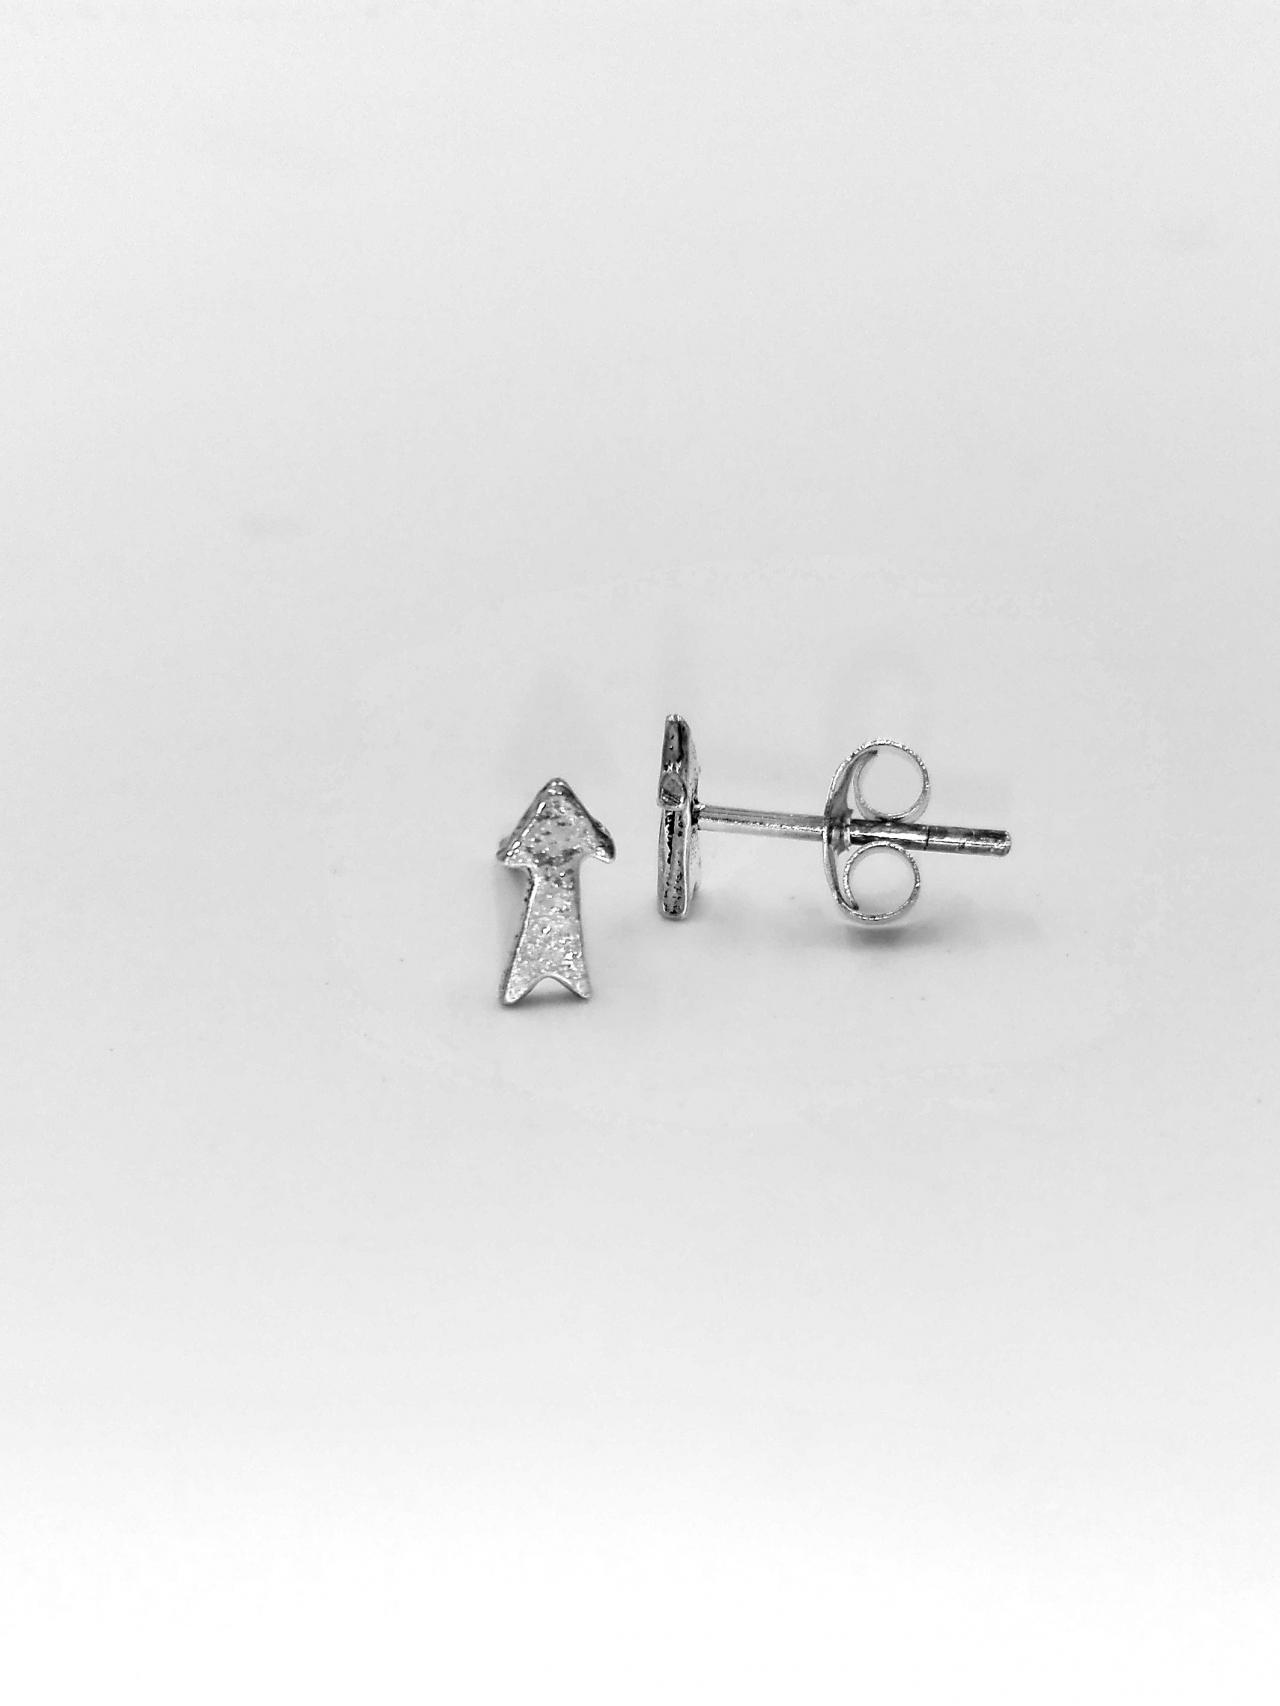 Sterling Silver Arrow Stud Earrings With Simple Design For Everyday Wear And Birthday Gift For Her